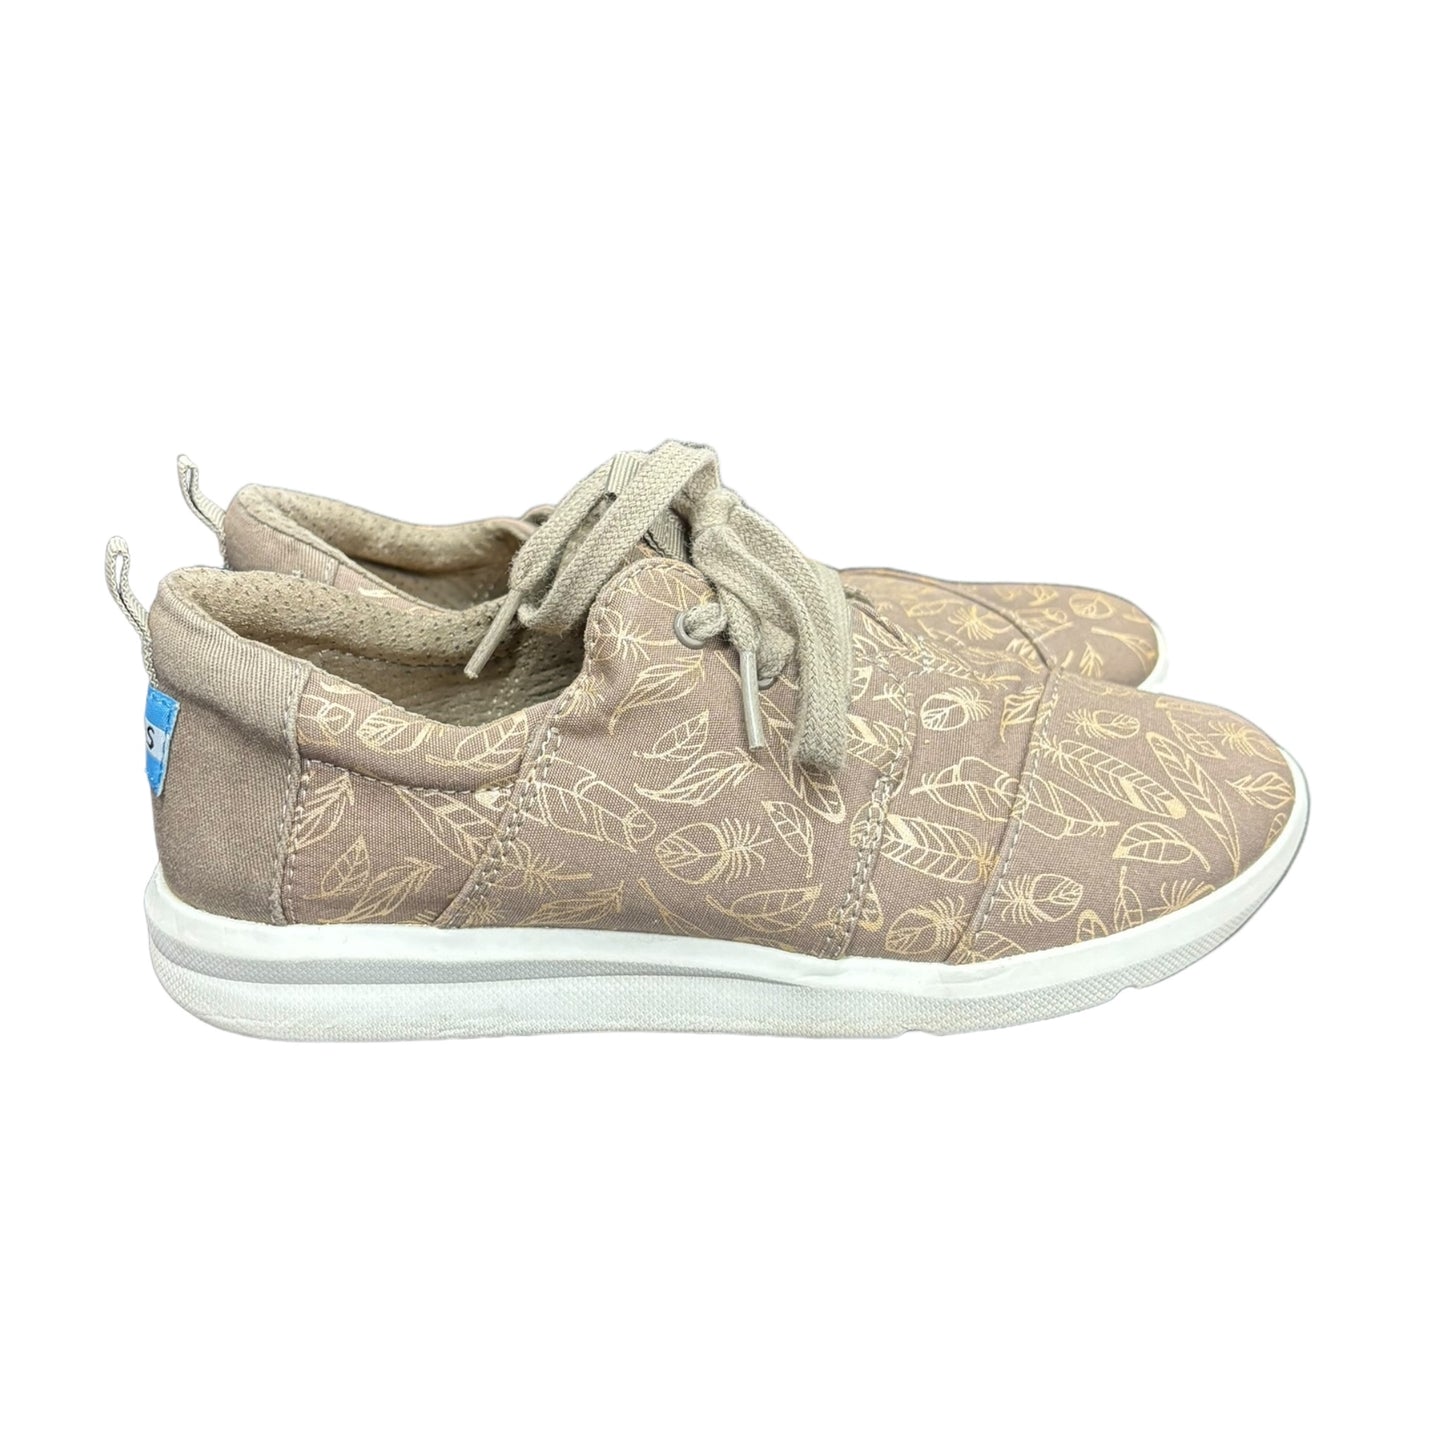 Shoes Sneakers By Toms  Size: 6